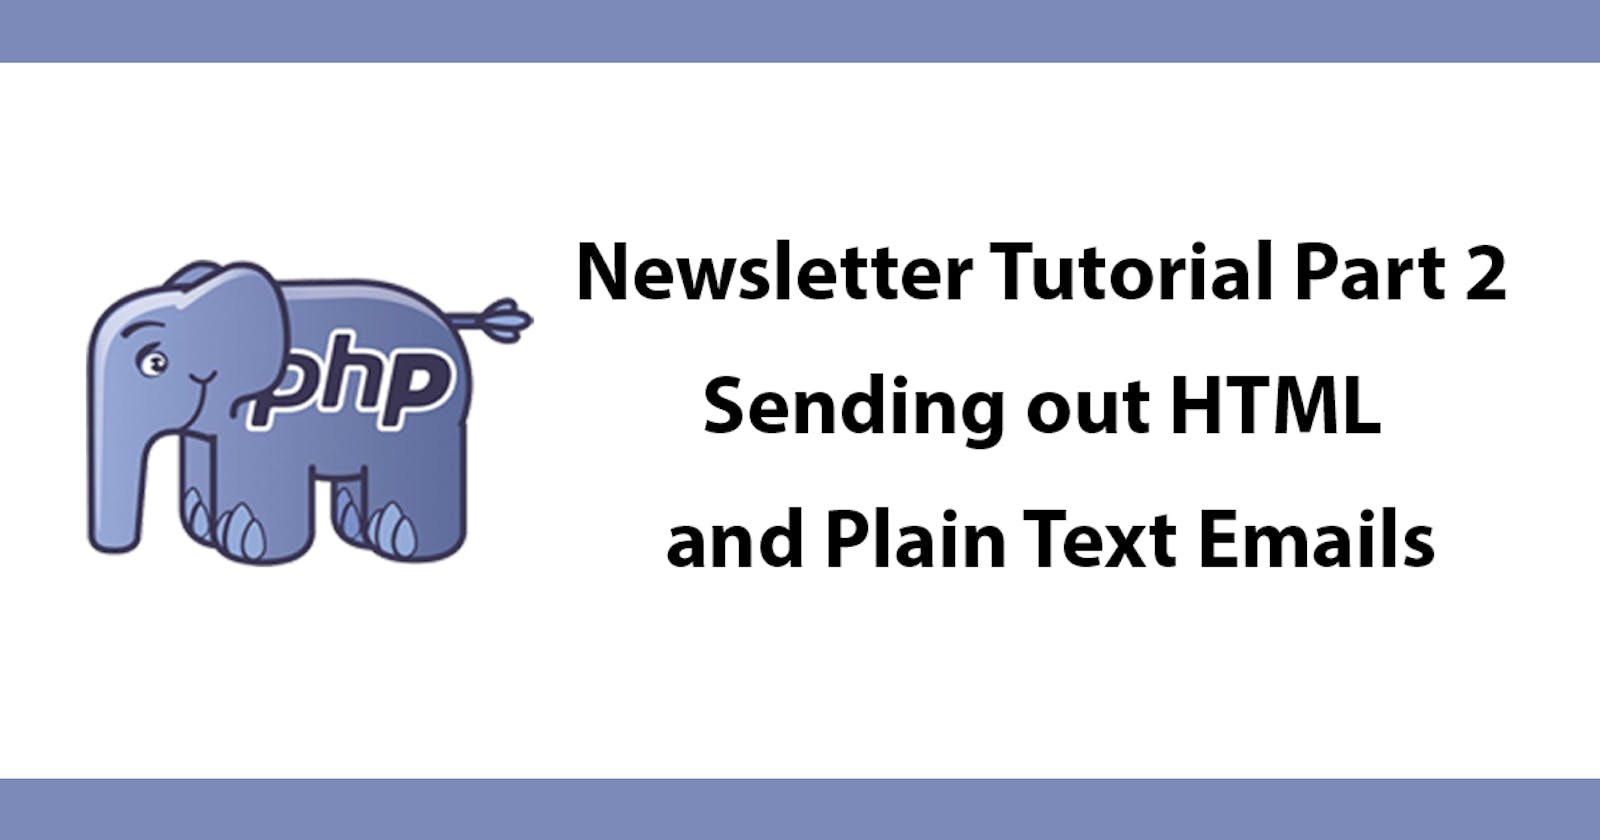 Newsletter Tutorial Part 2 Sending out HTML and Plain Text Emails